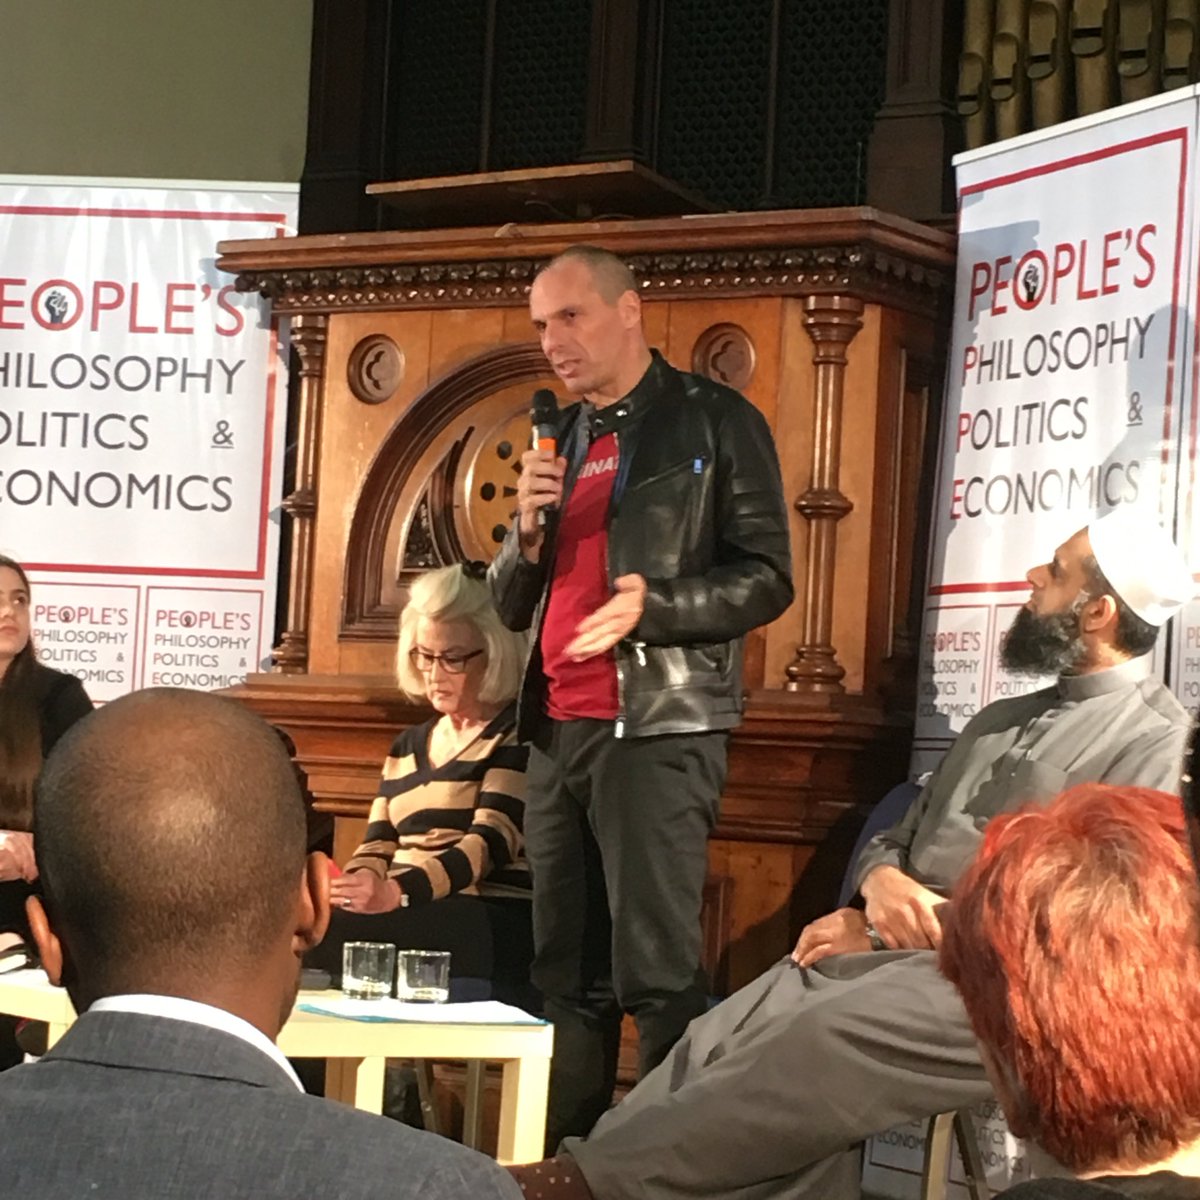 #peoplesppe @yanisvaroufakis  the British must reclaim democracy by staying in the EU and challenging it https://t.co/qScFGWpz06